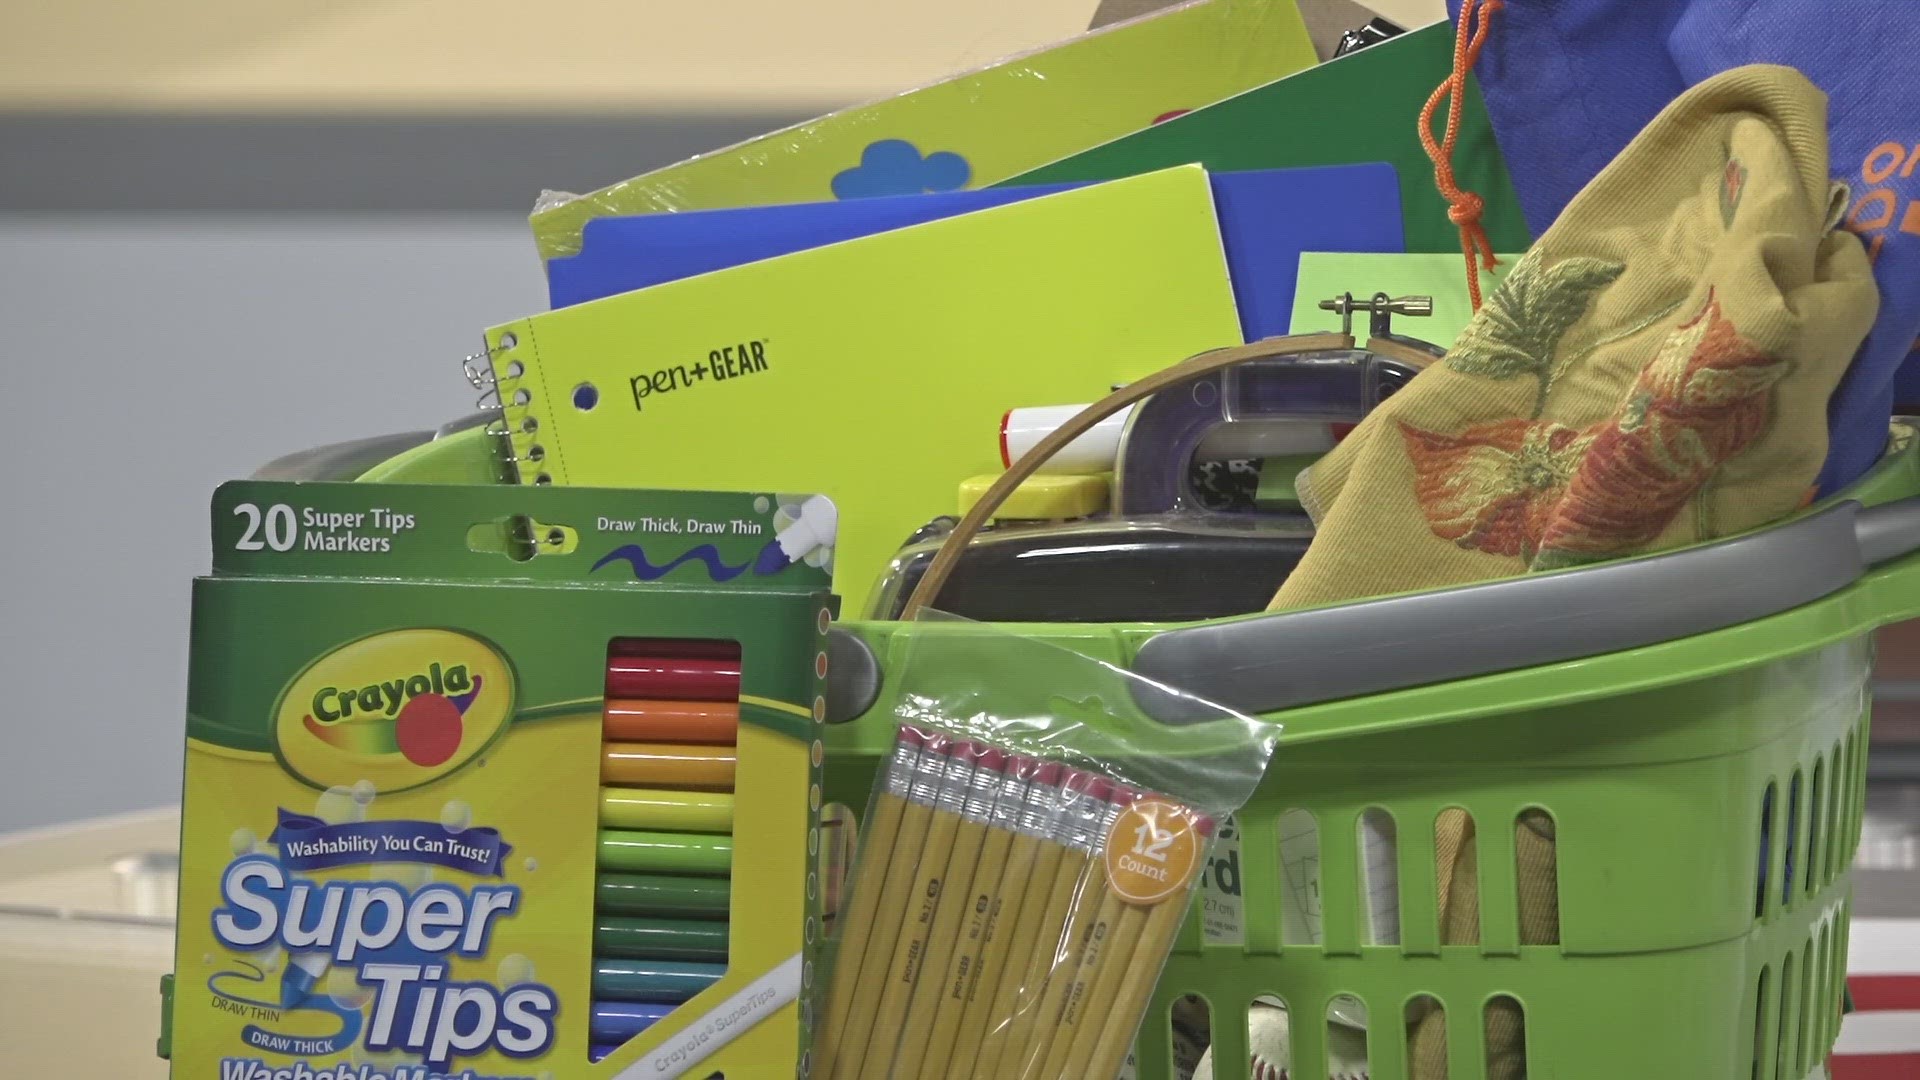 The City of Greensboro is accepting new and unwrapped supplies or a cash donation to the GEA Teacher Supply Warehouse as payment for parking fines.